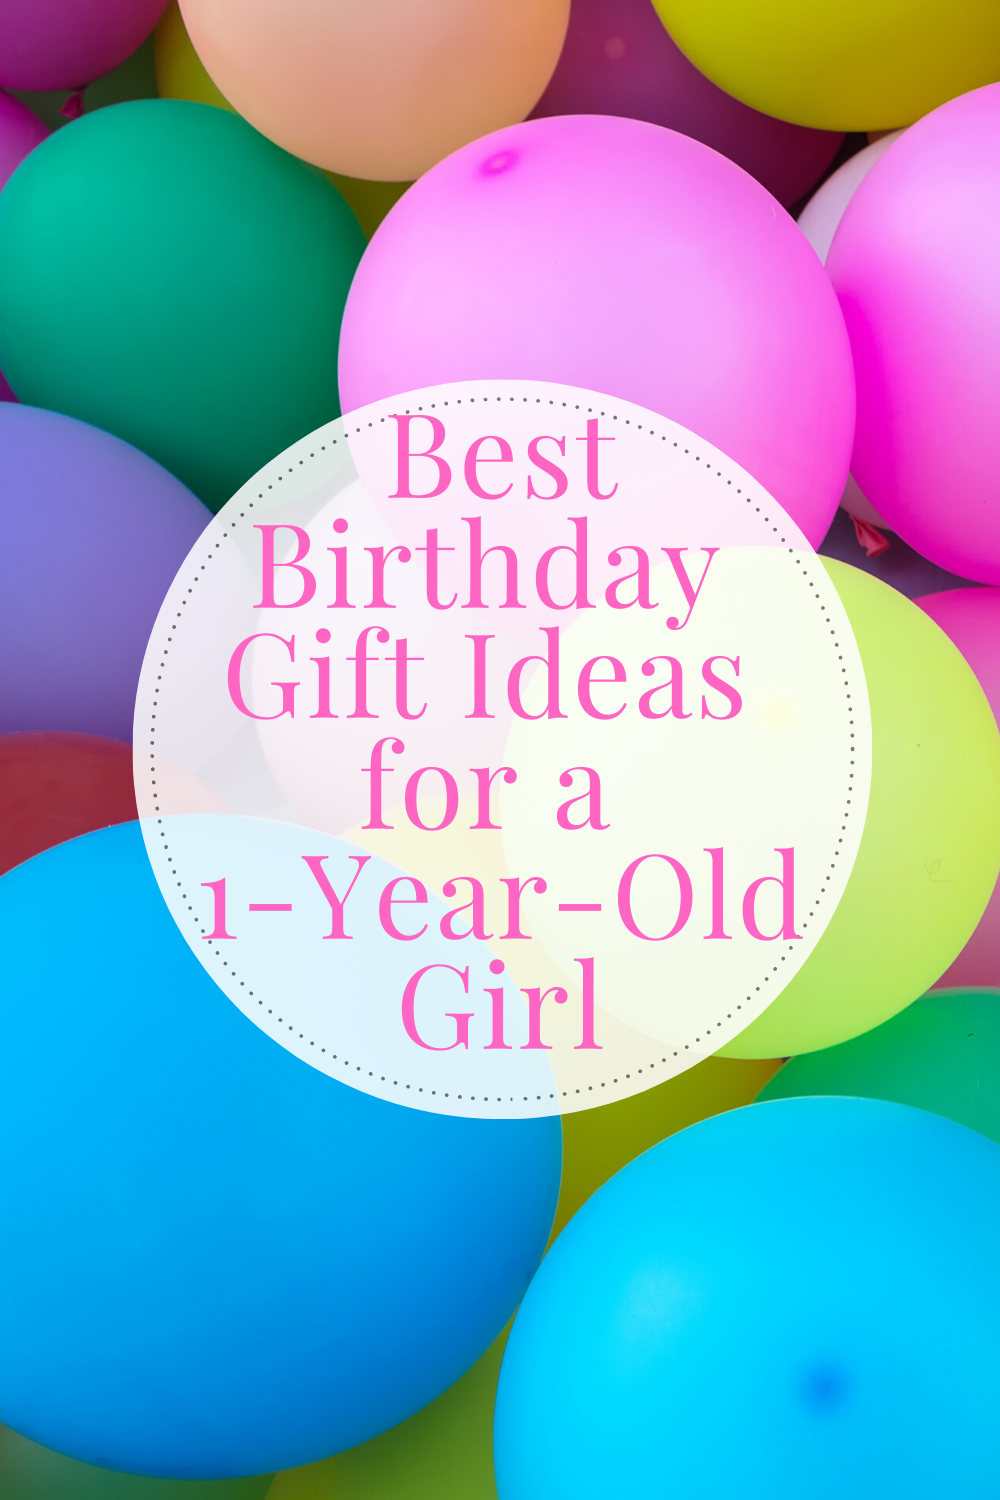 Best Birthday Gift Ideas for a 1 Year Old Girl